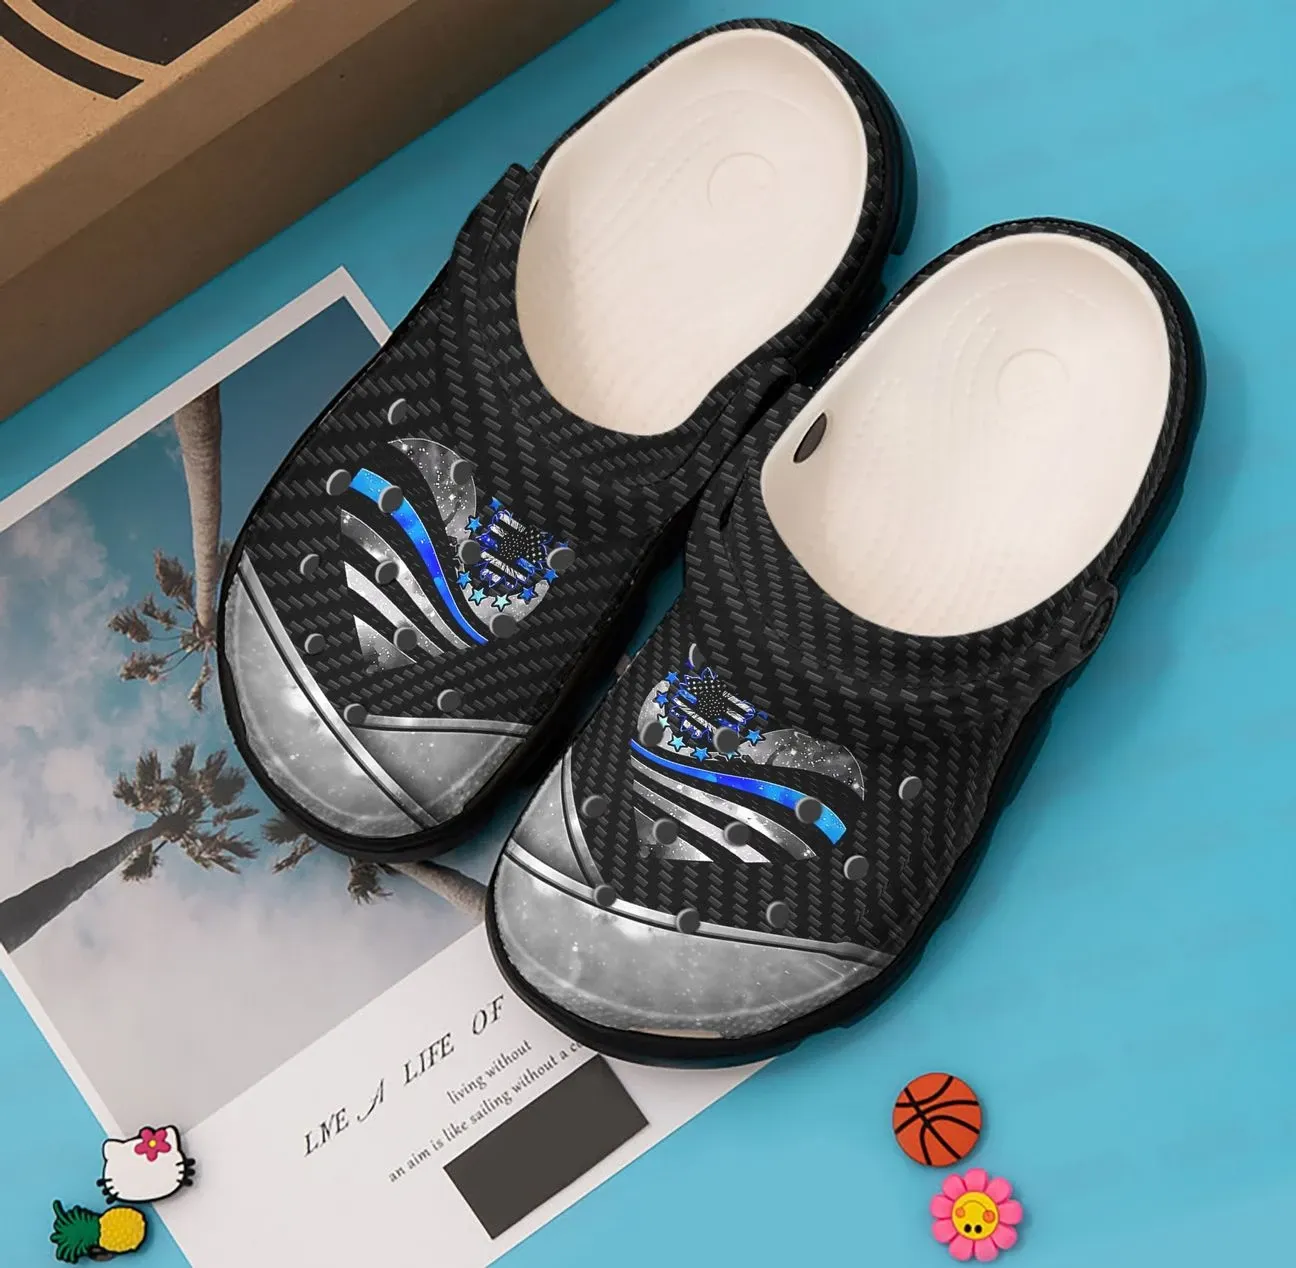 Police Personalized Clog Custom Crocs Comfortablefashion Style Comfortable For Women Men Kid Print 3D Back The Blue Heart